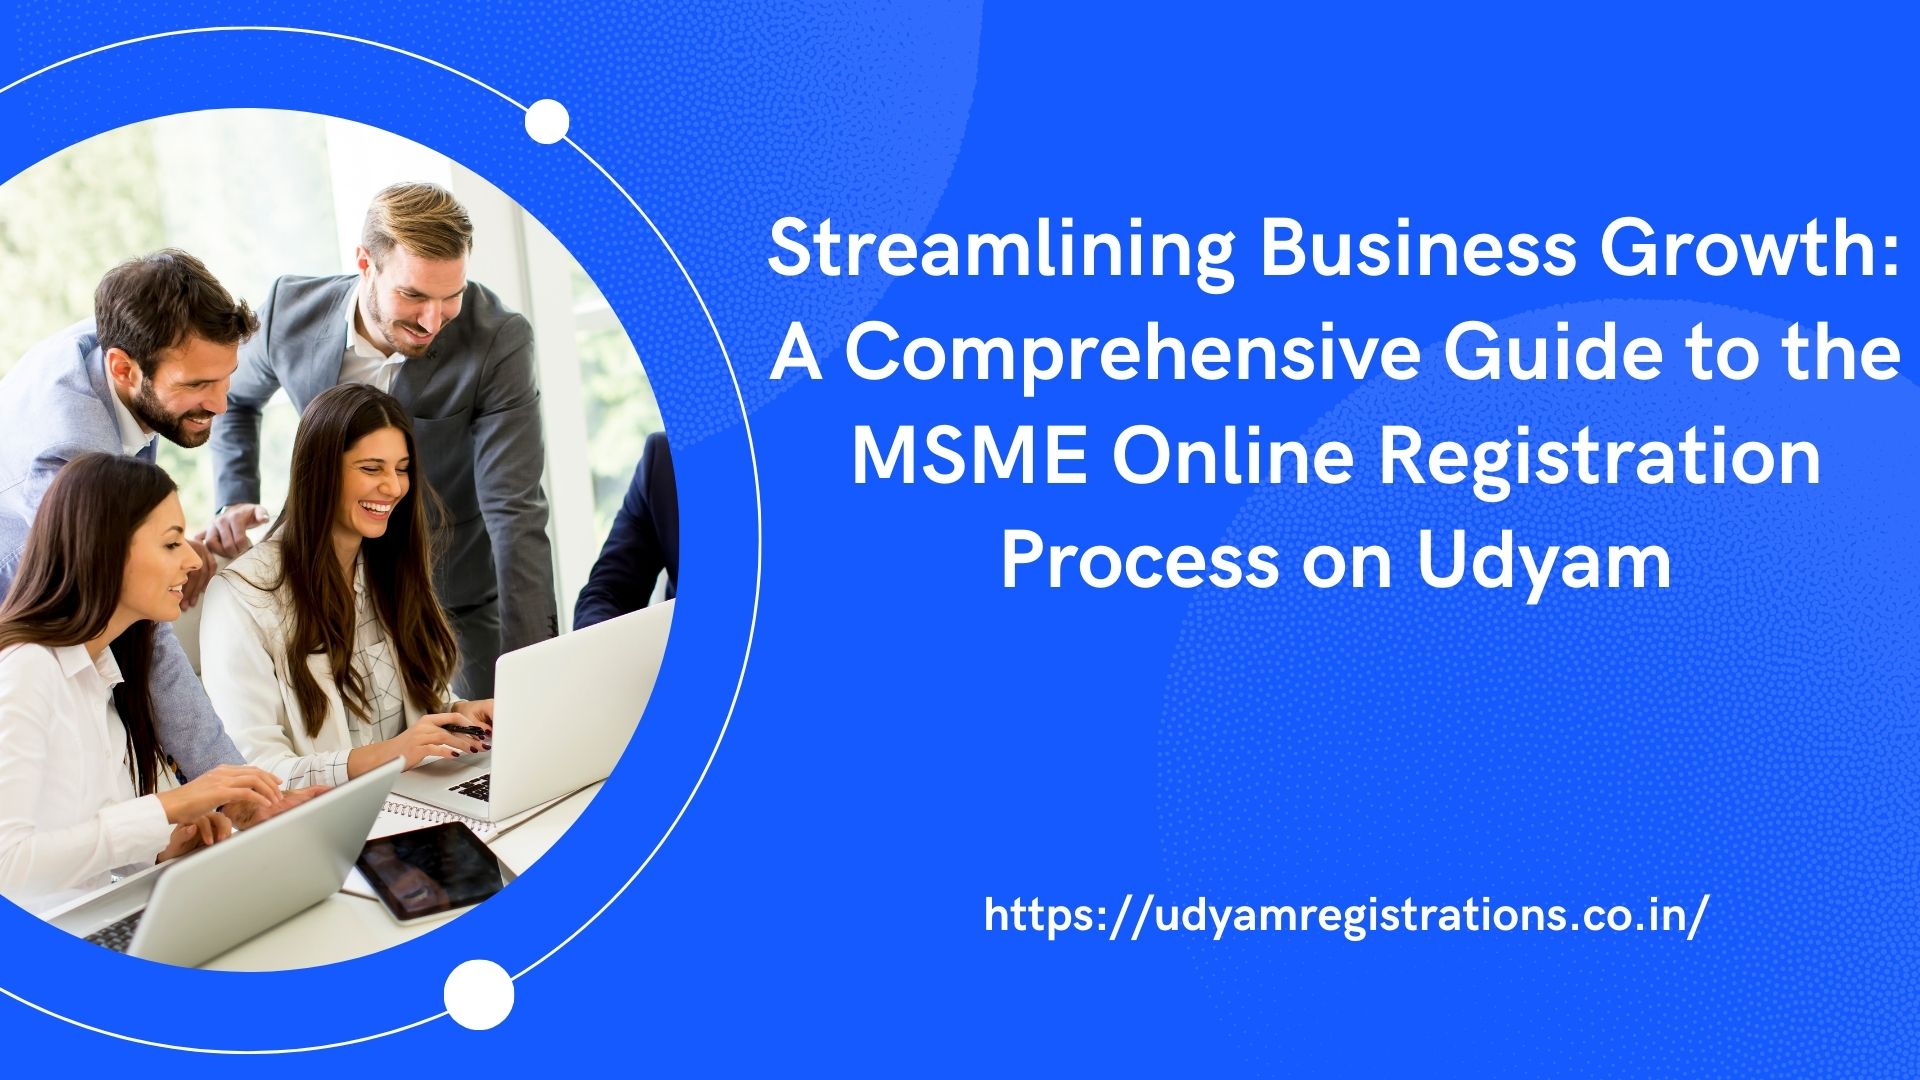 Streamlining Business Growth A Comprehensive Guide to the MSME Online Registration Process on Udyam (1)